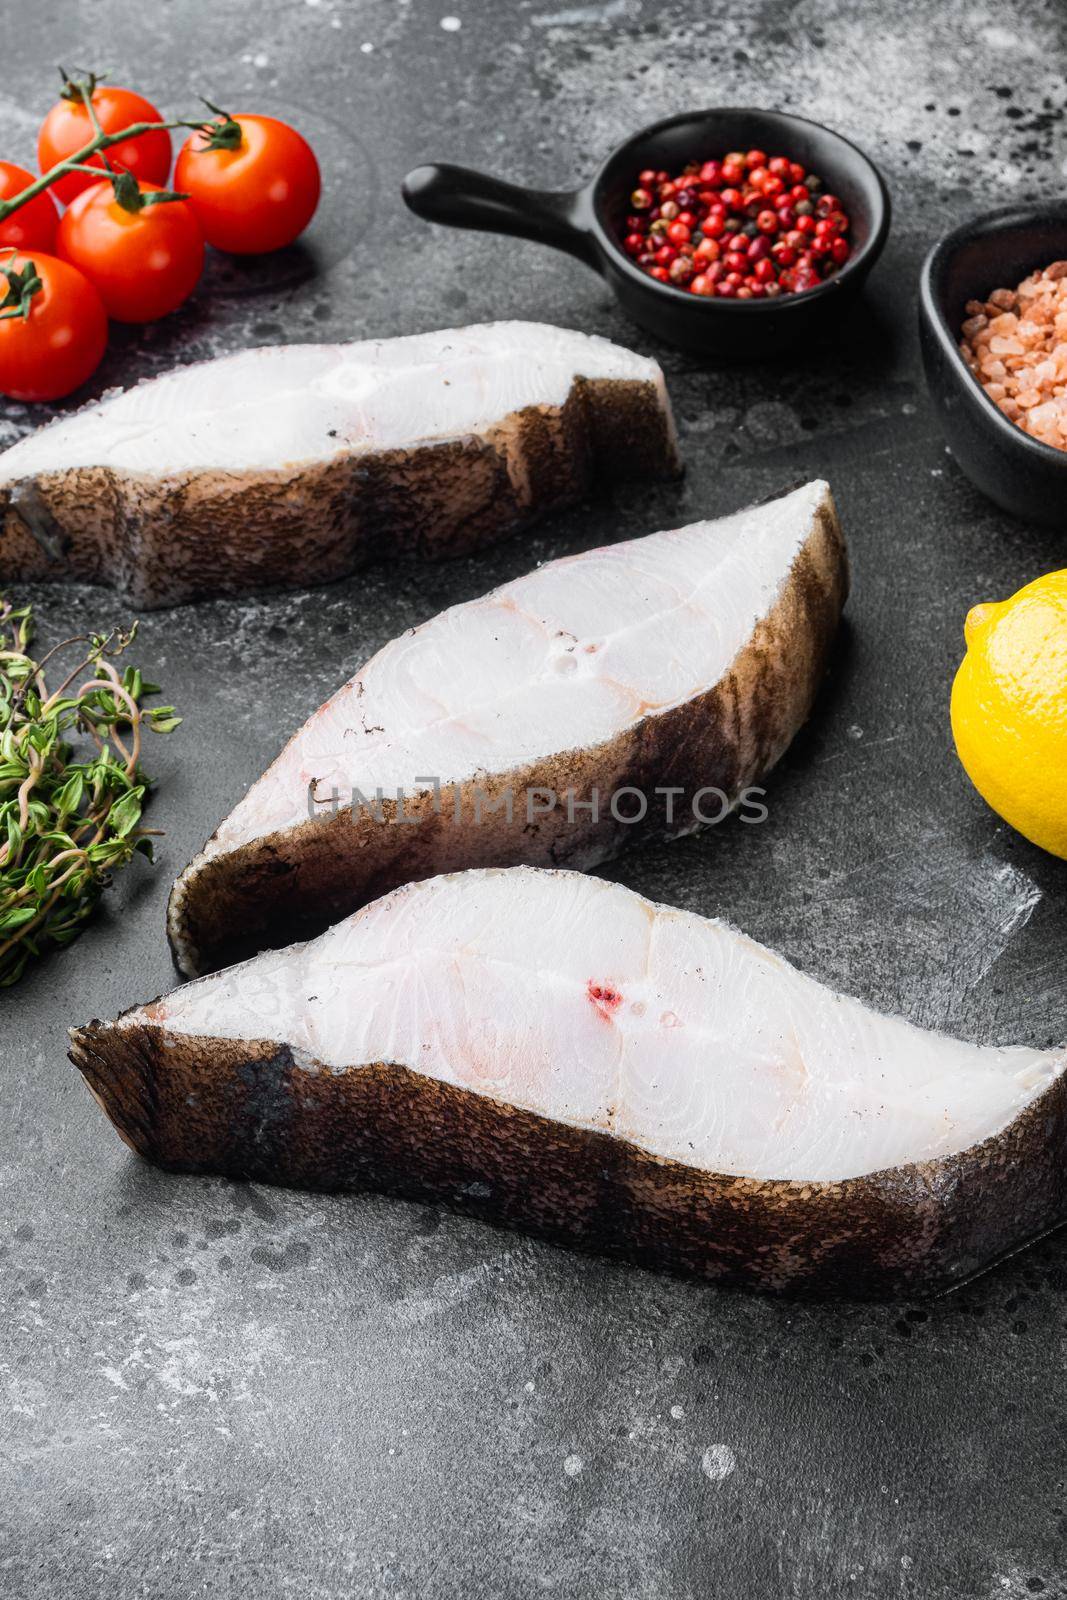 Raw halibut saltwater fish steak, with ingredients and rosemary herbs, on black dark stone table background by Ilianesolenyi